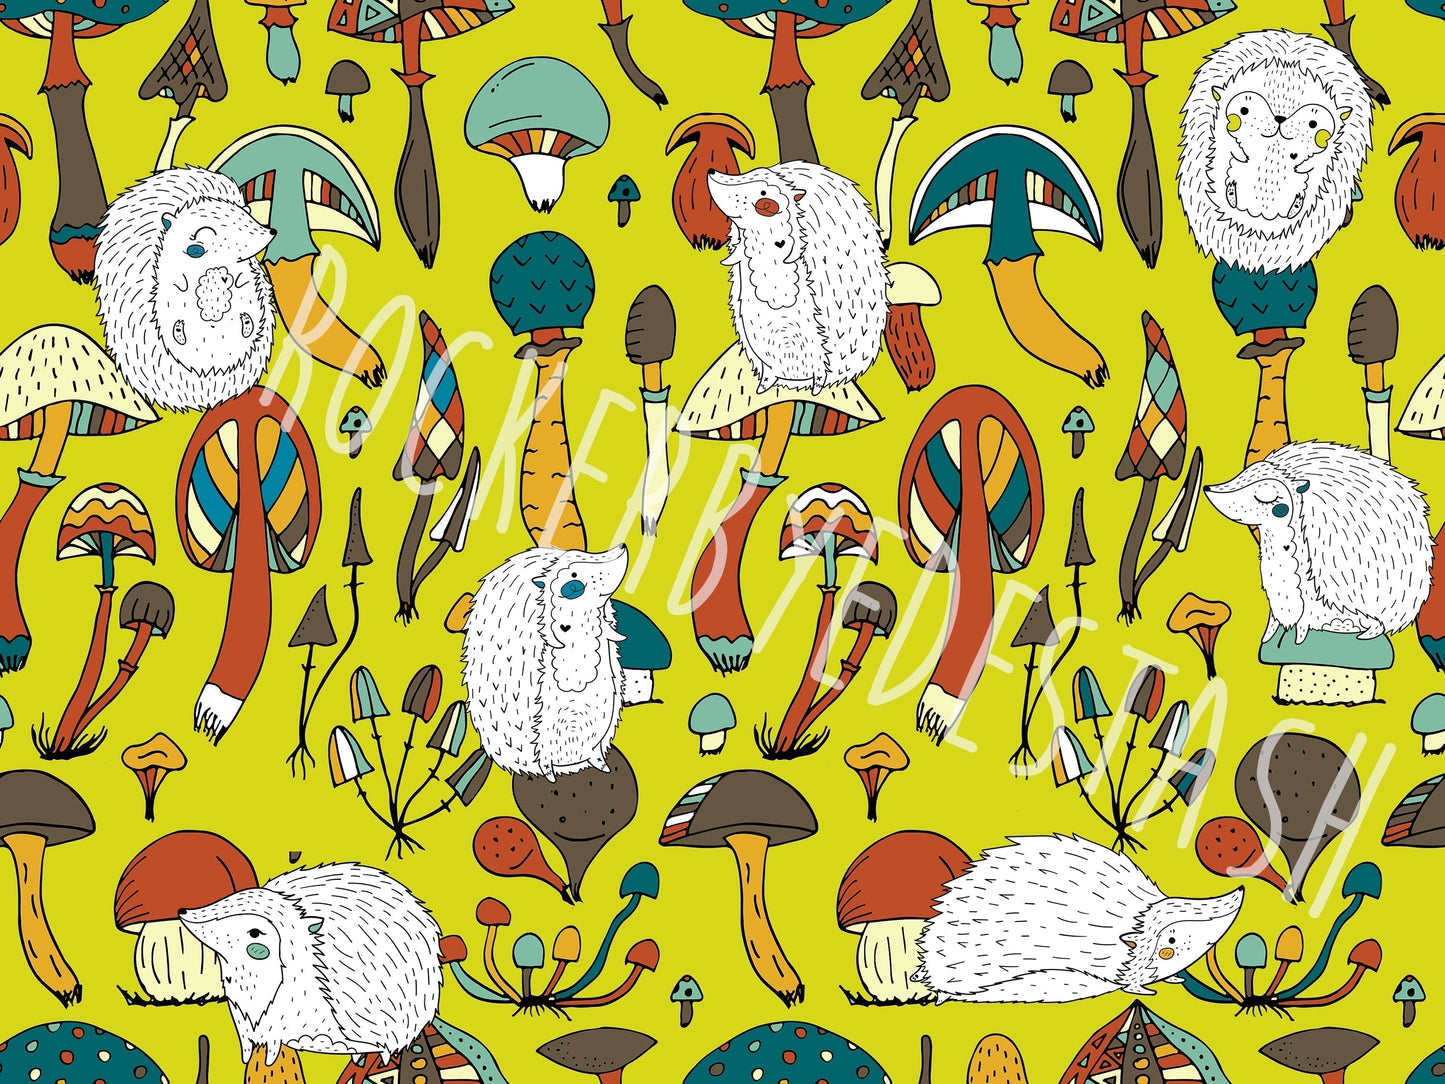 Vinyl - Round OO - Skulls & Shrooms, Magical Forest, New Wilderness & Hedgies - Fabric Retail